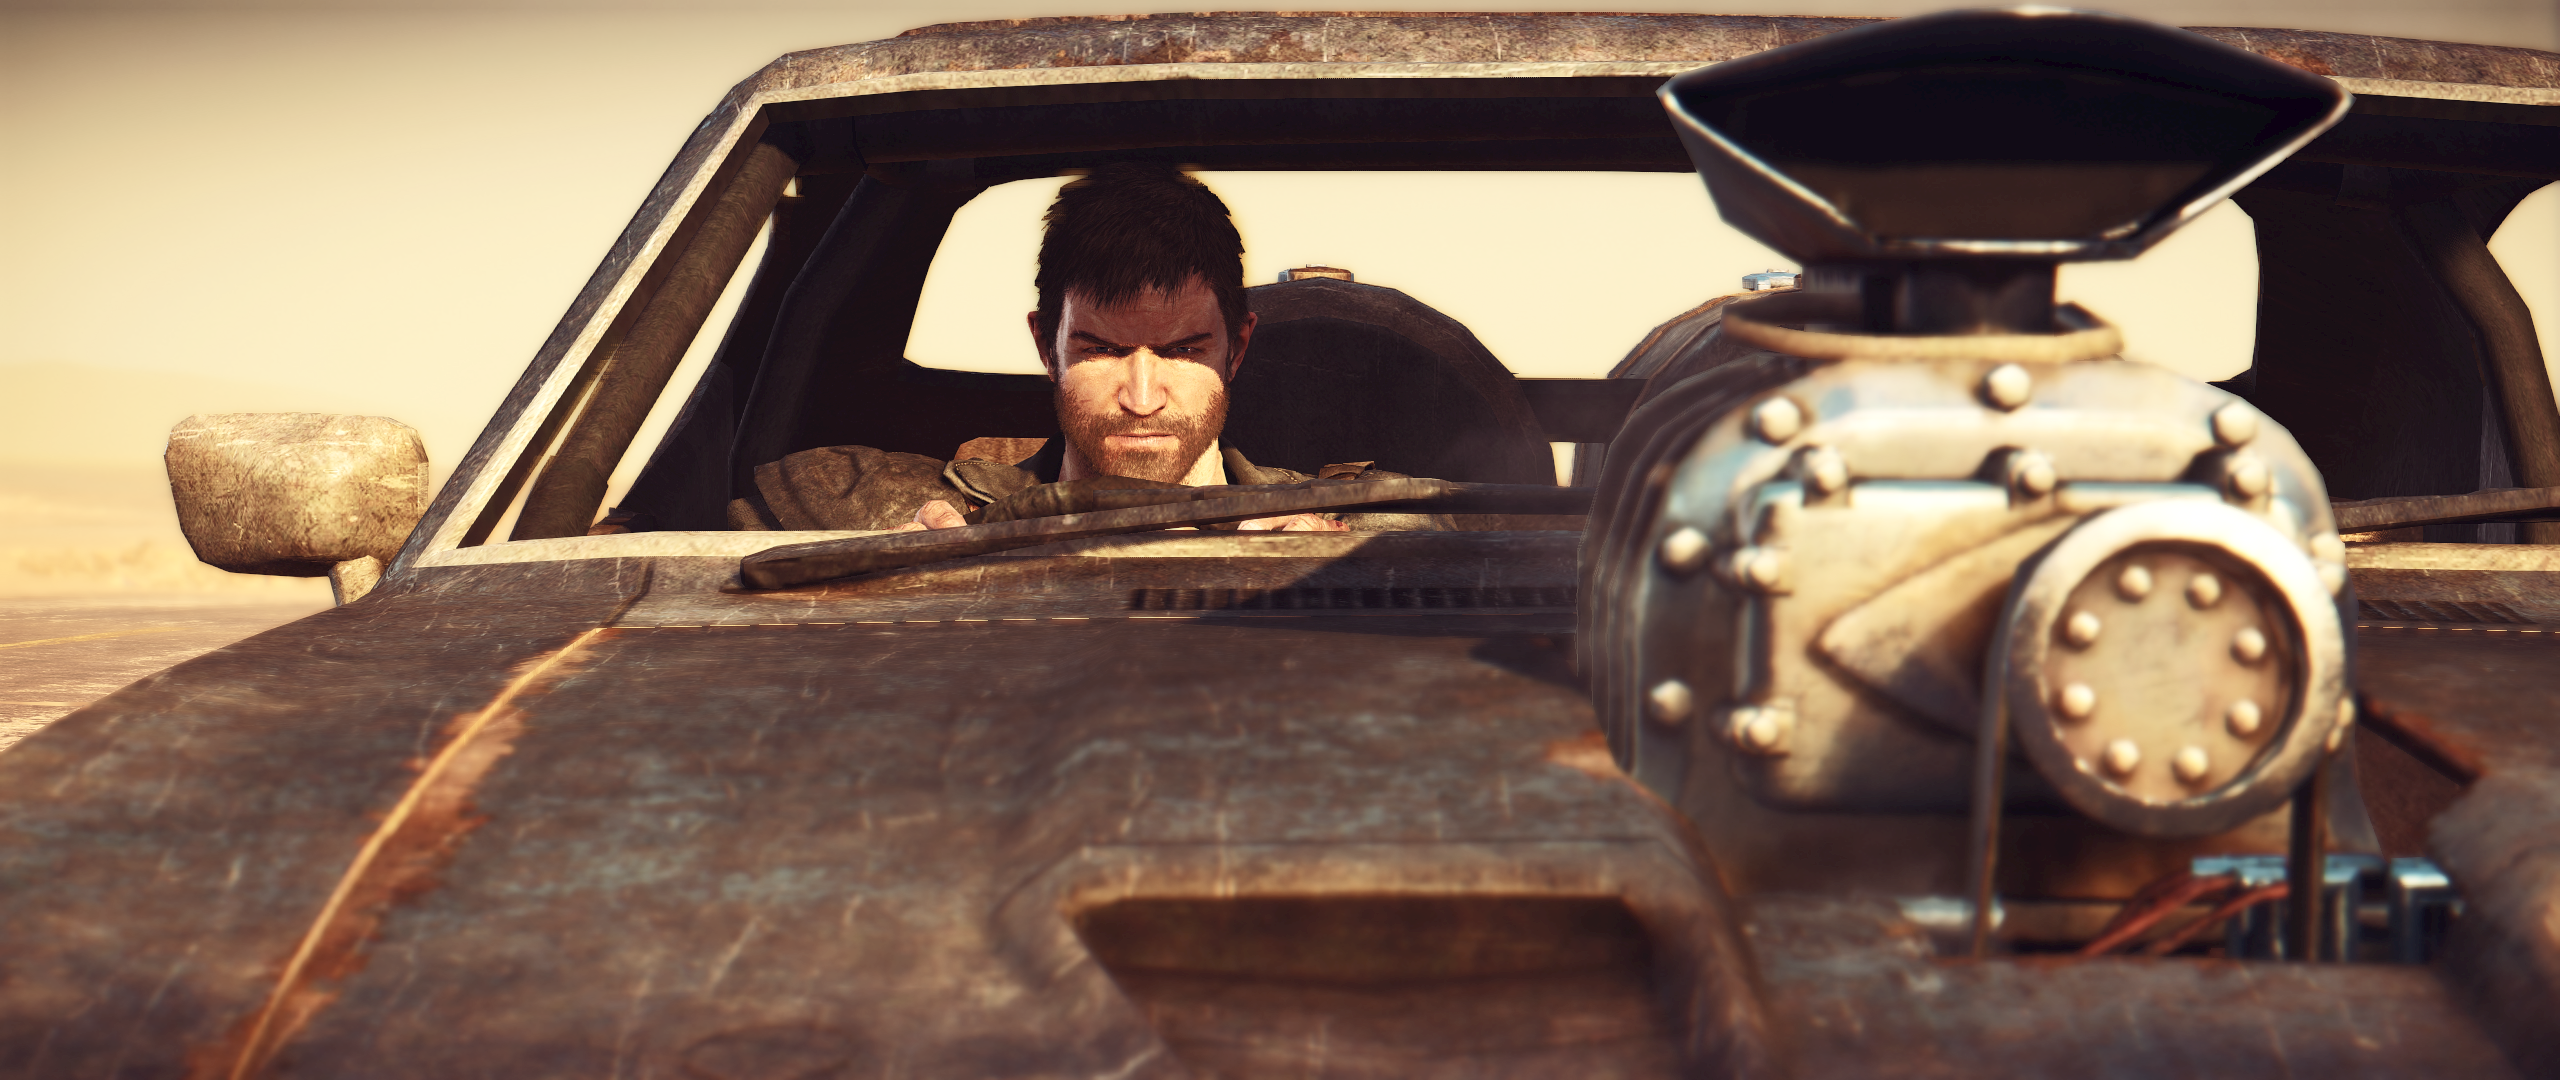 MadMax 2015-09-20 07-55-57.png